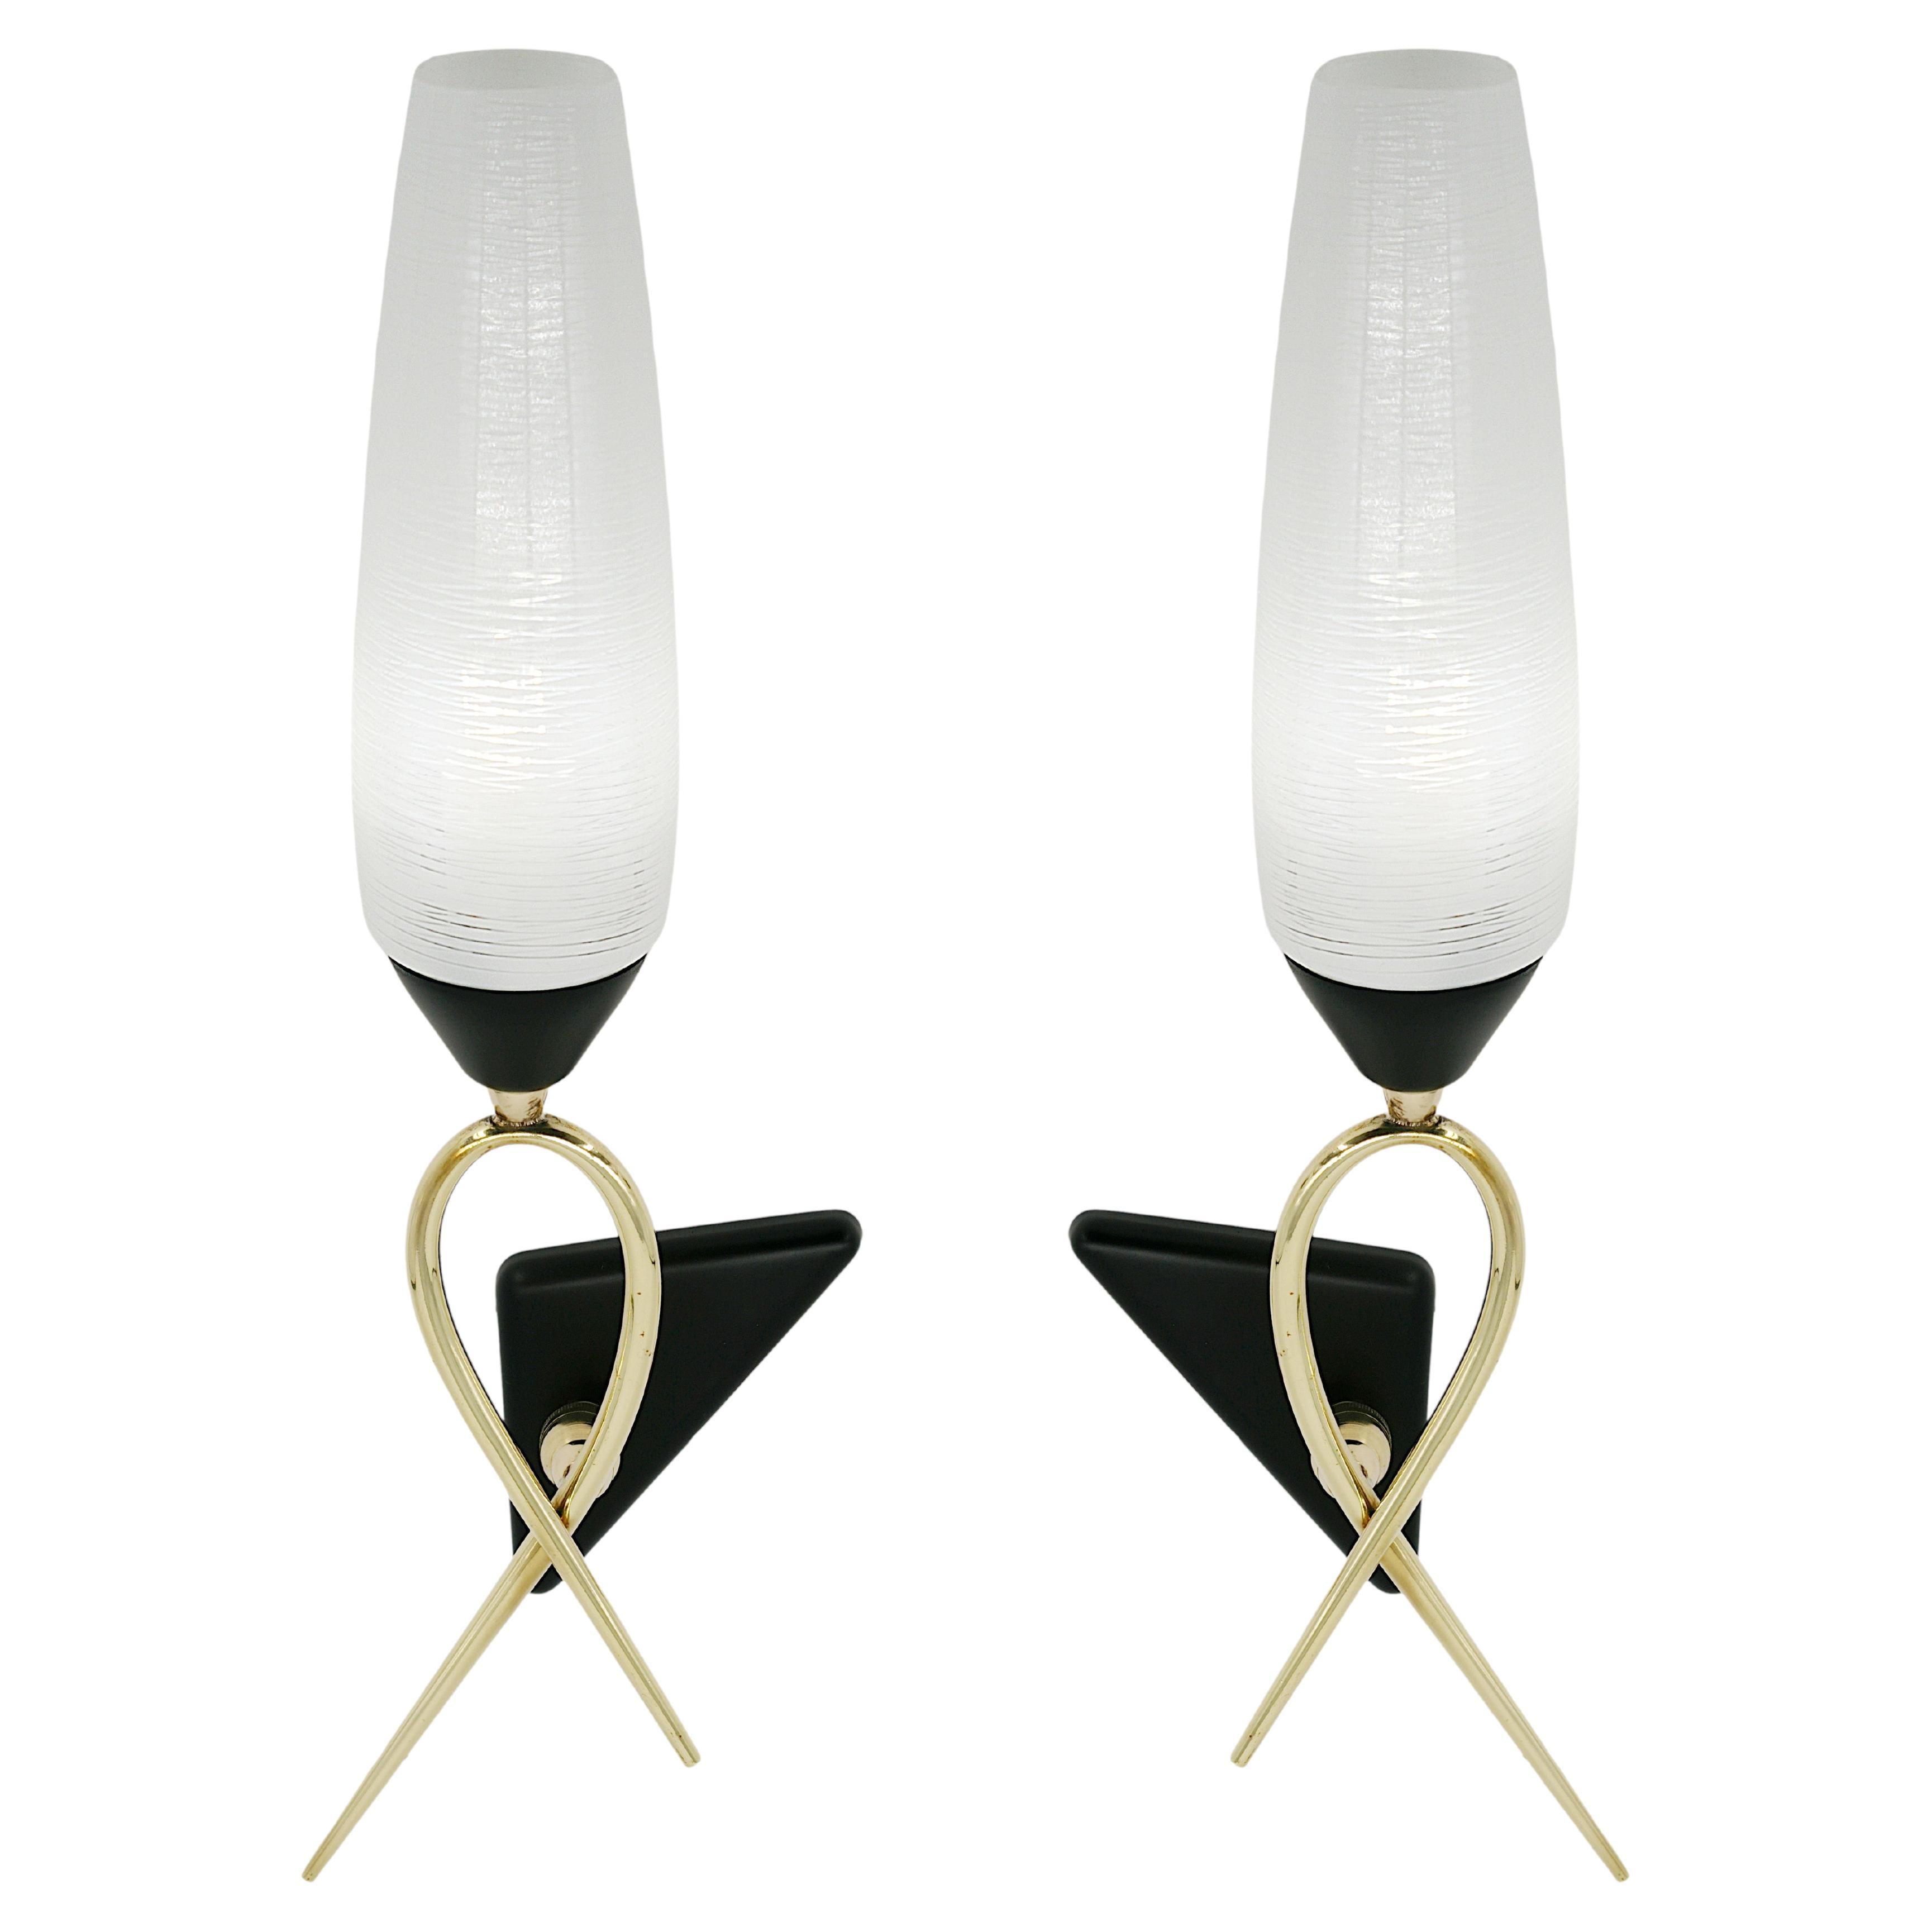 Maison Lunel French Midcentury Rotary Wall Light Pair, 1950s For Sale